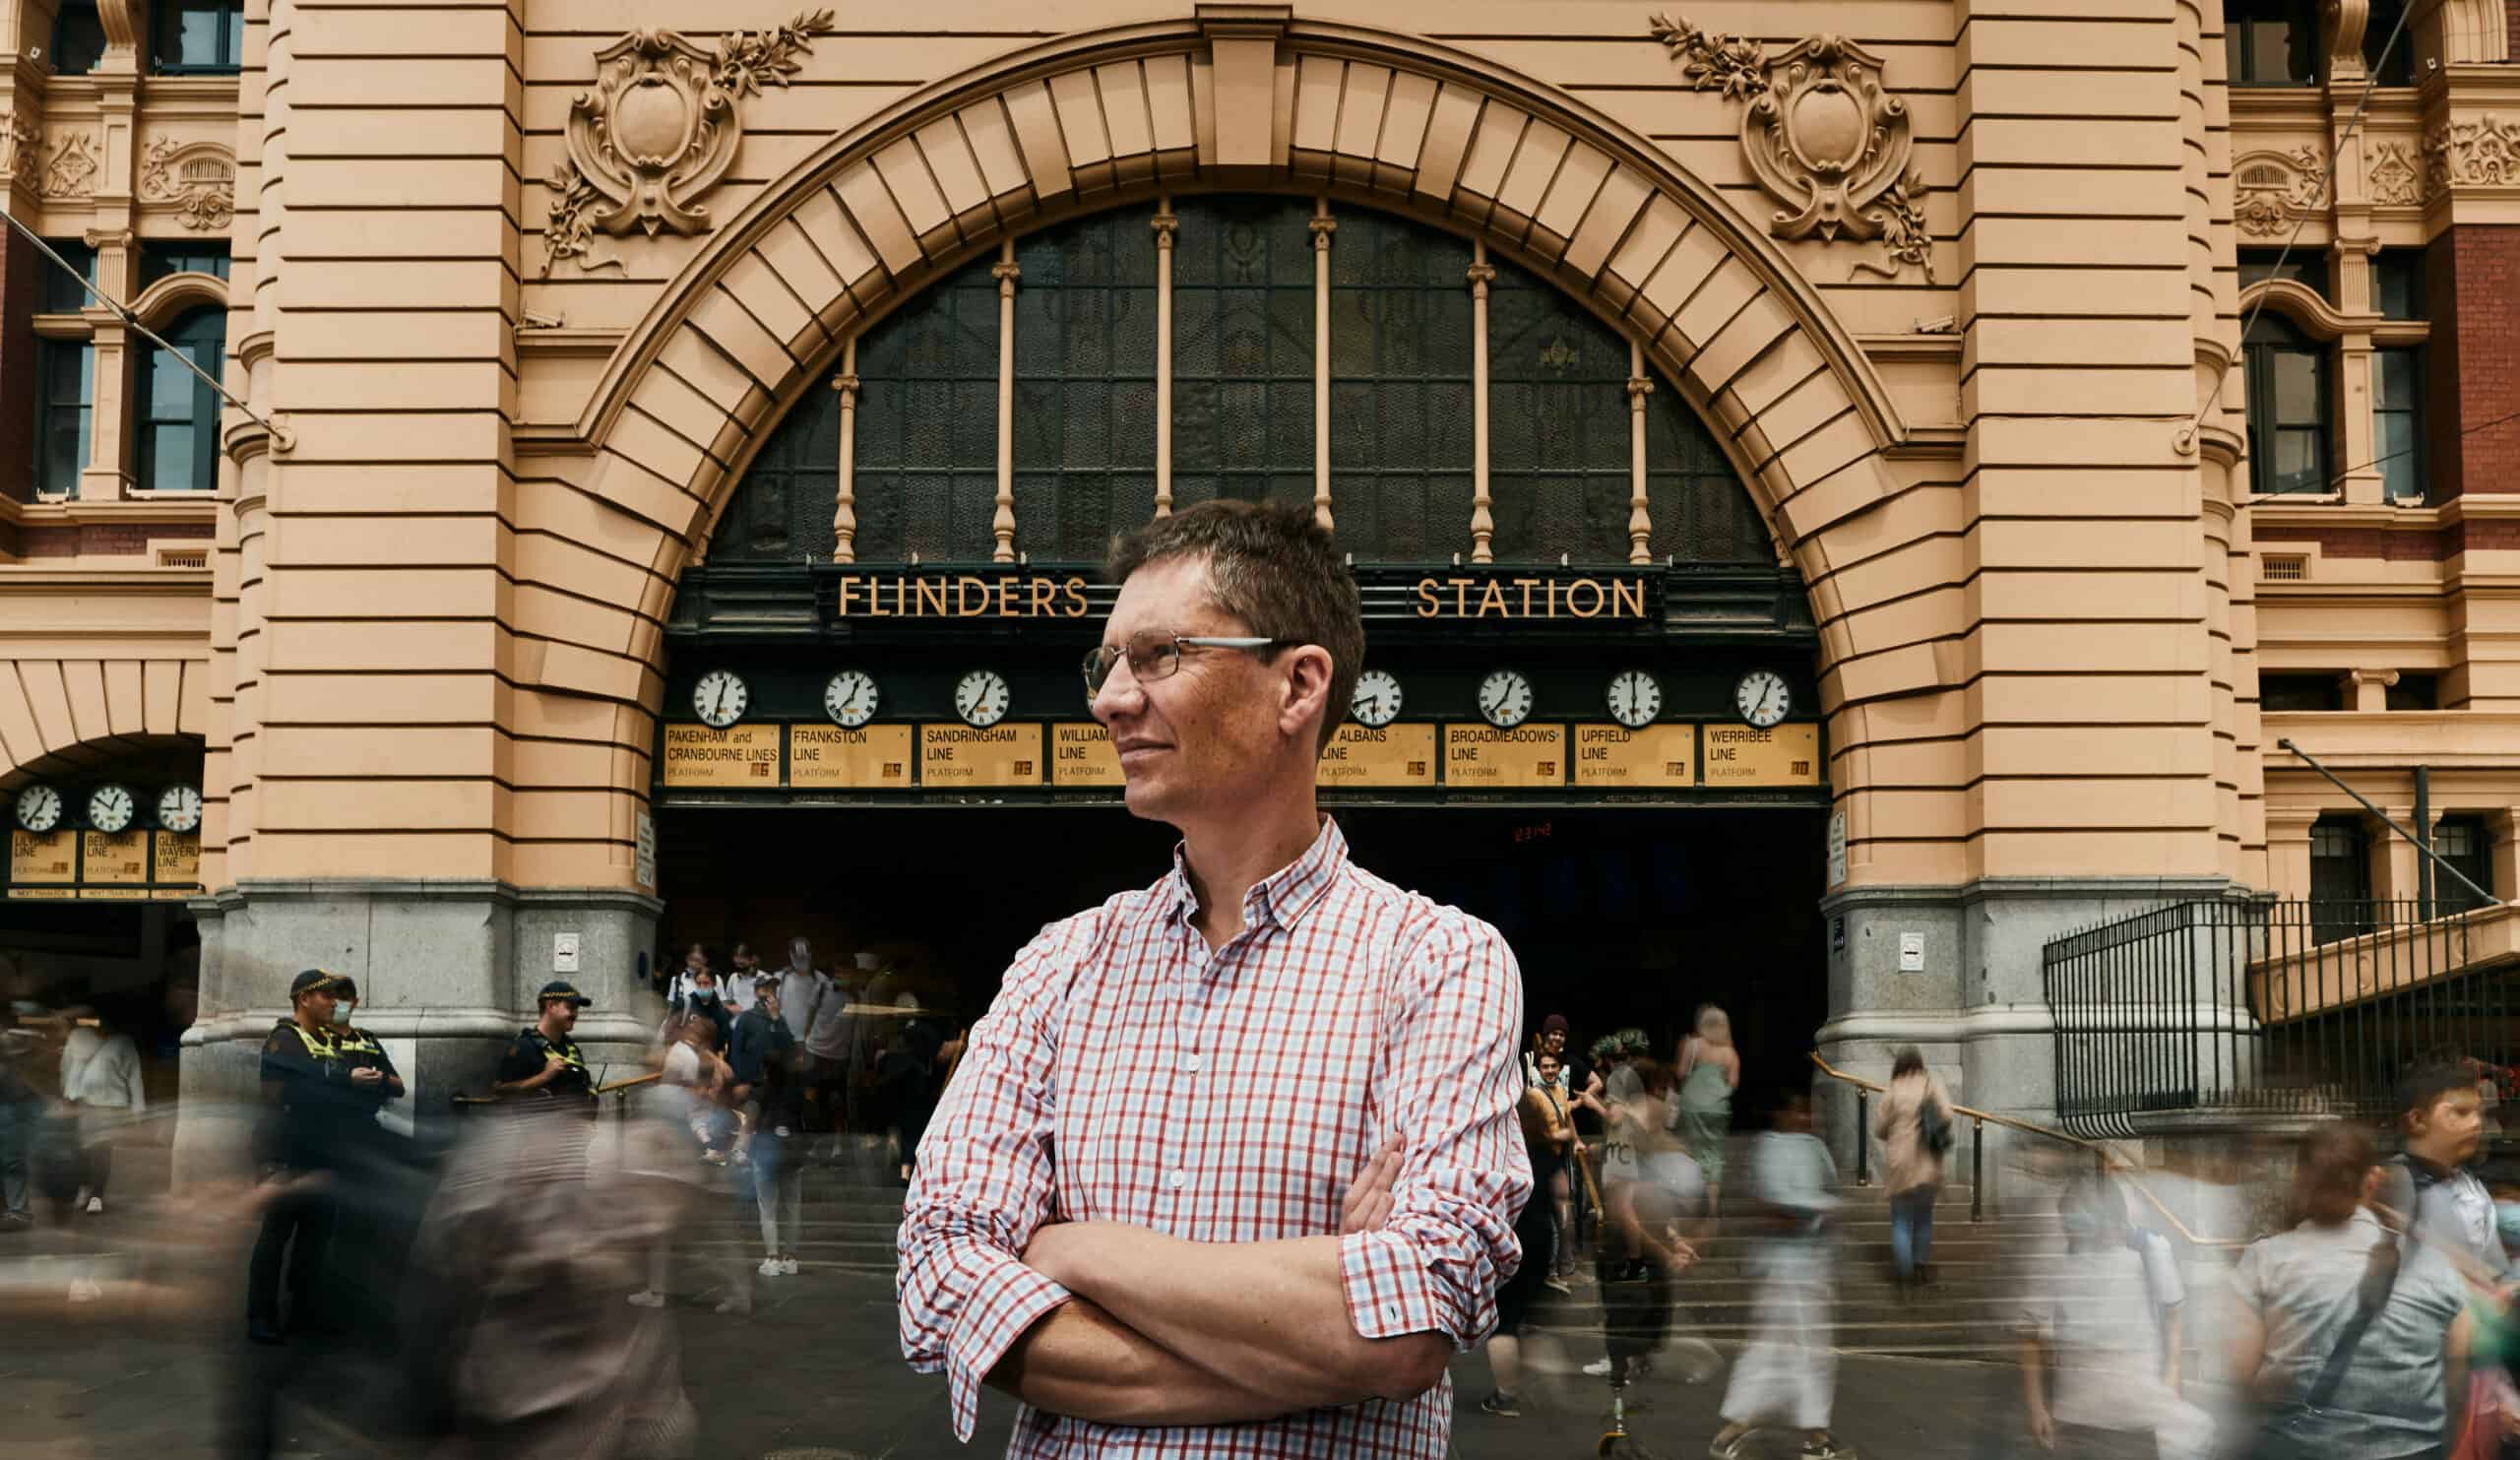 Professor James McCaw standing in front of the Edwardian Flinders Street railway station in Melbourne with people streaming past him